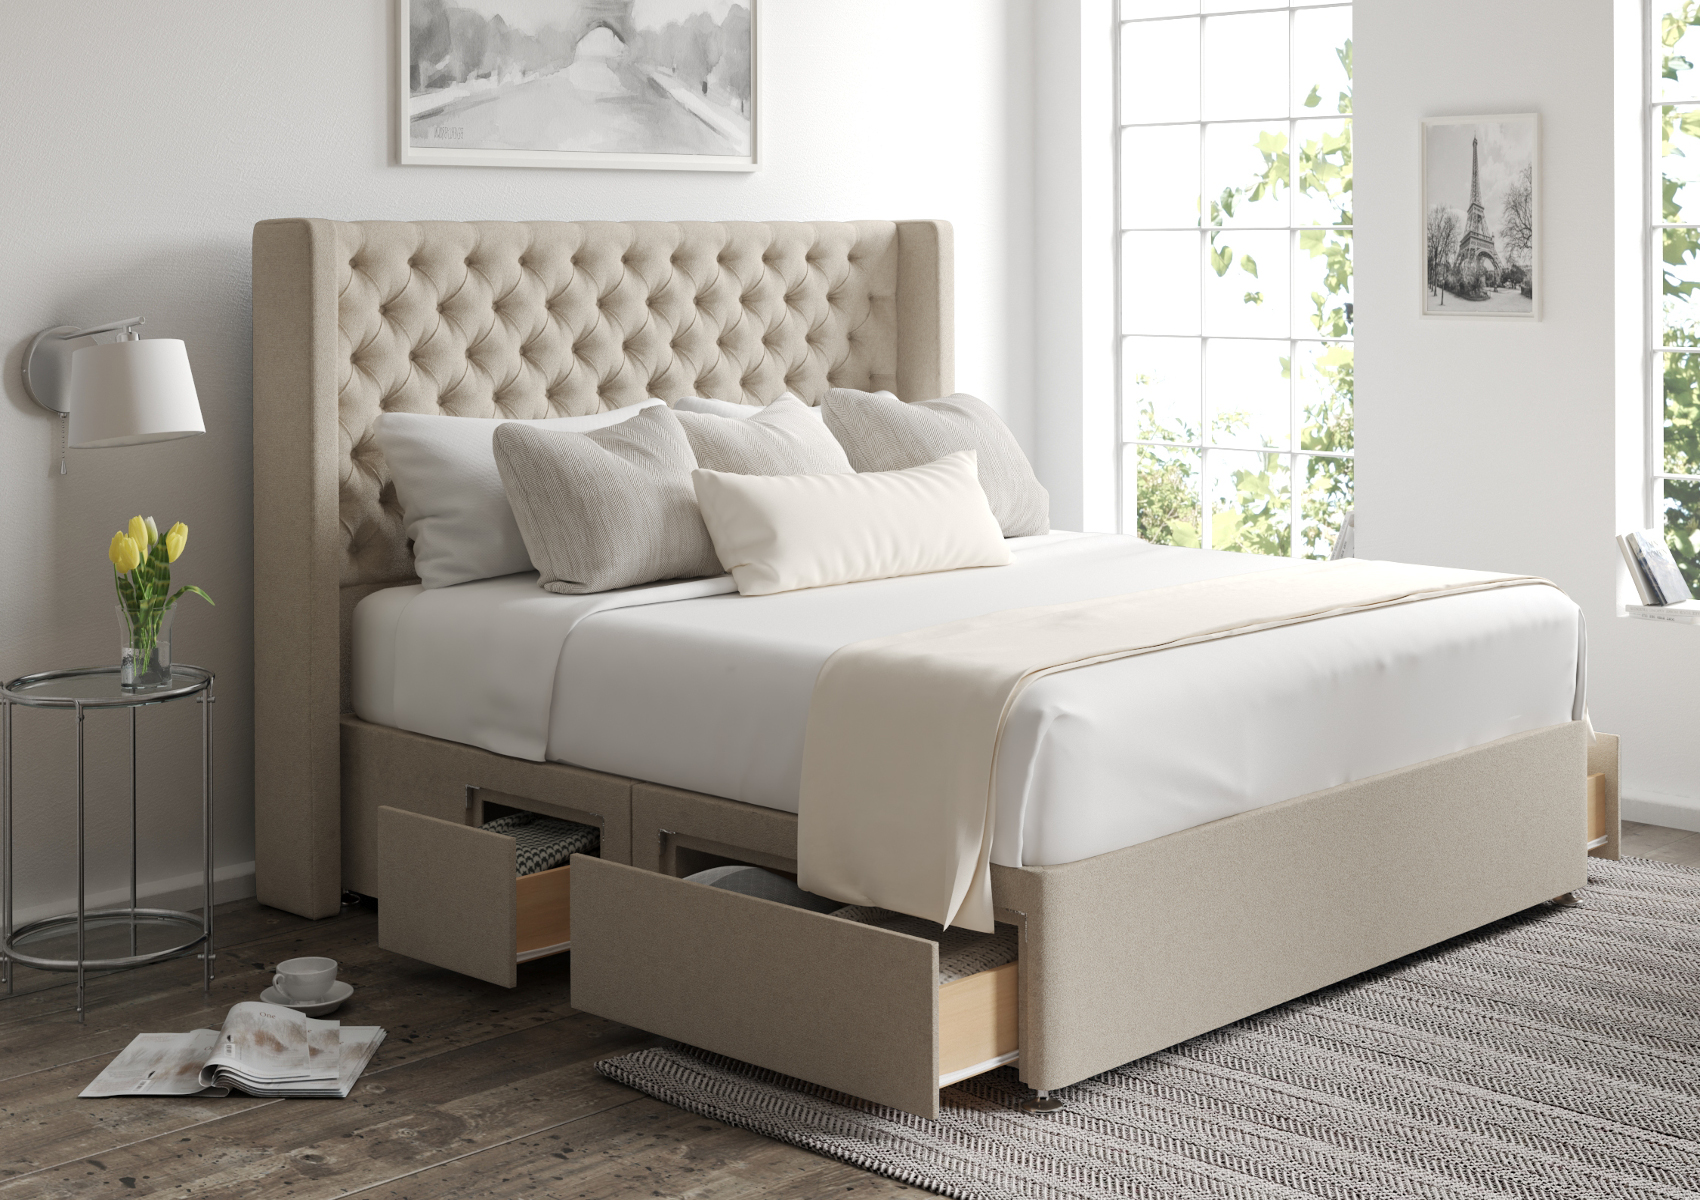 View Bella Hugo Royal Upholstered Double Storage Bed Time4Sleep information